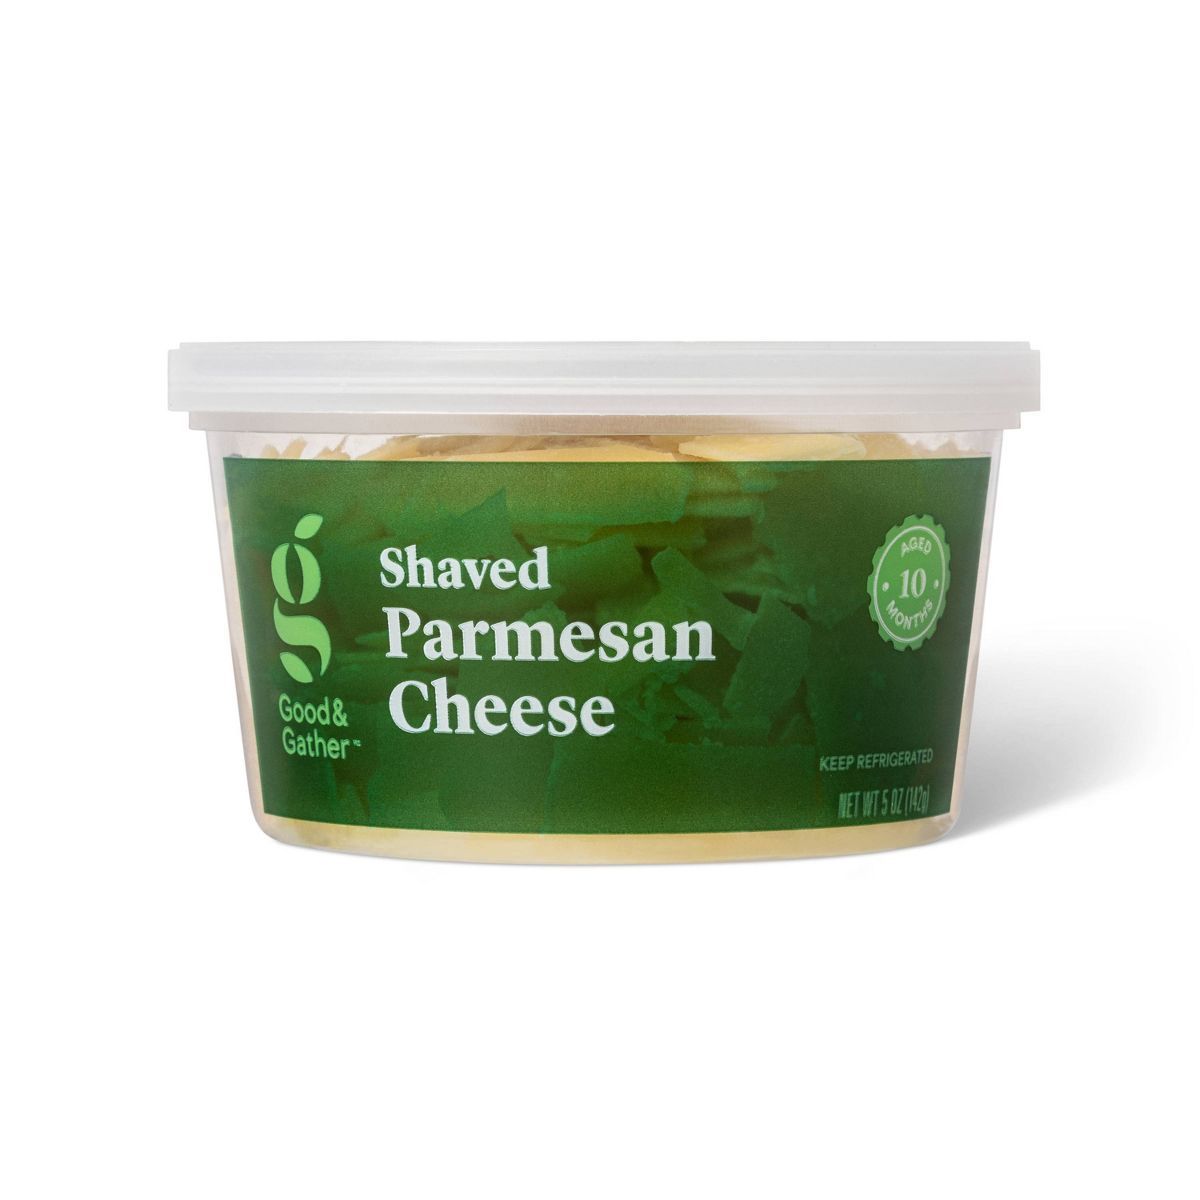 Shaved Parmesan Cheese Cup - 5oz - Good & Gather™ | Target